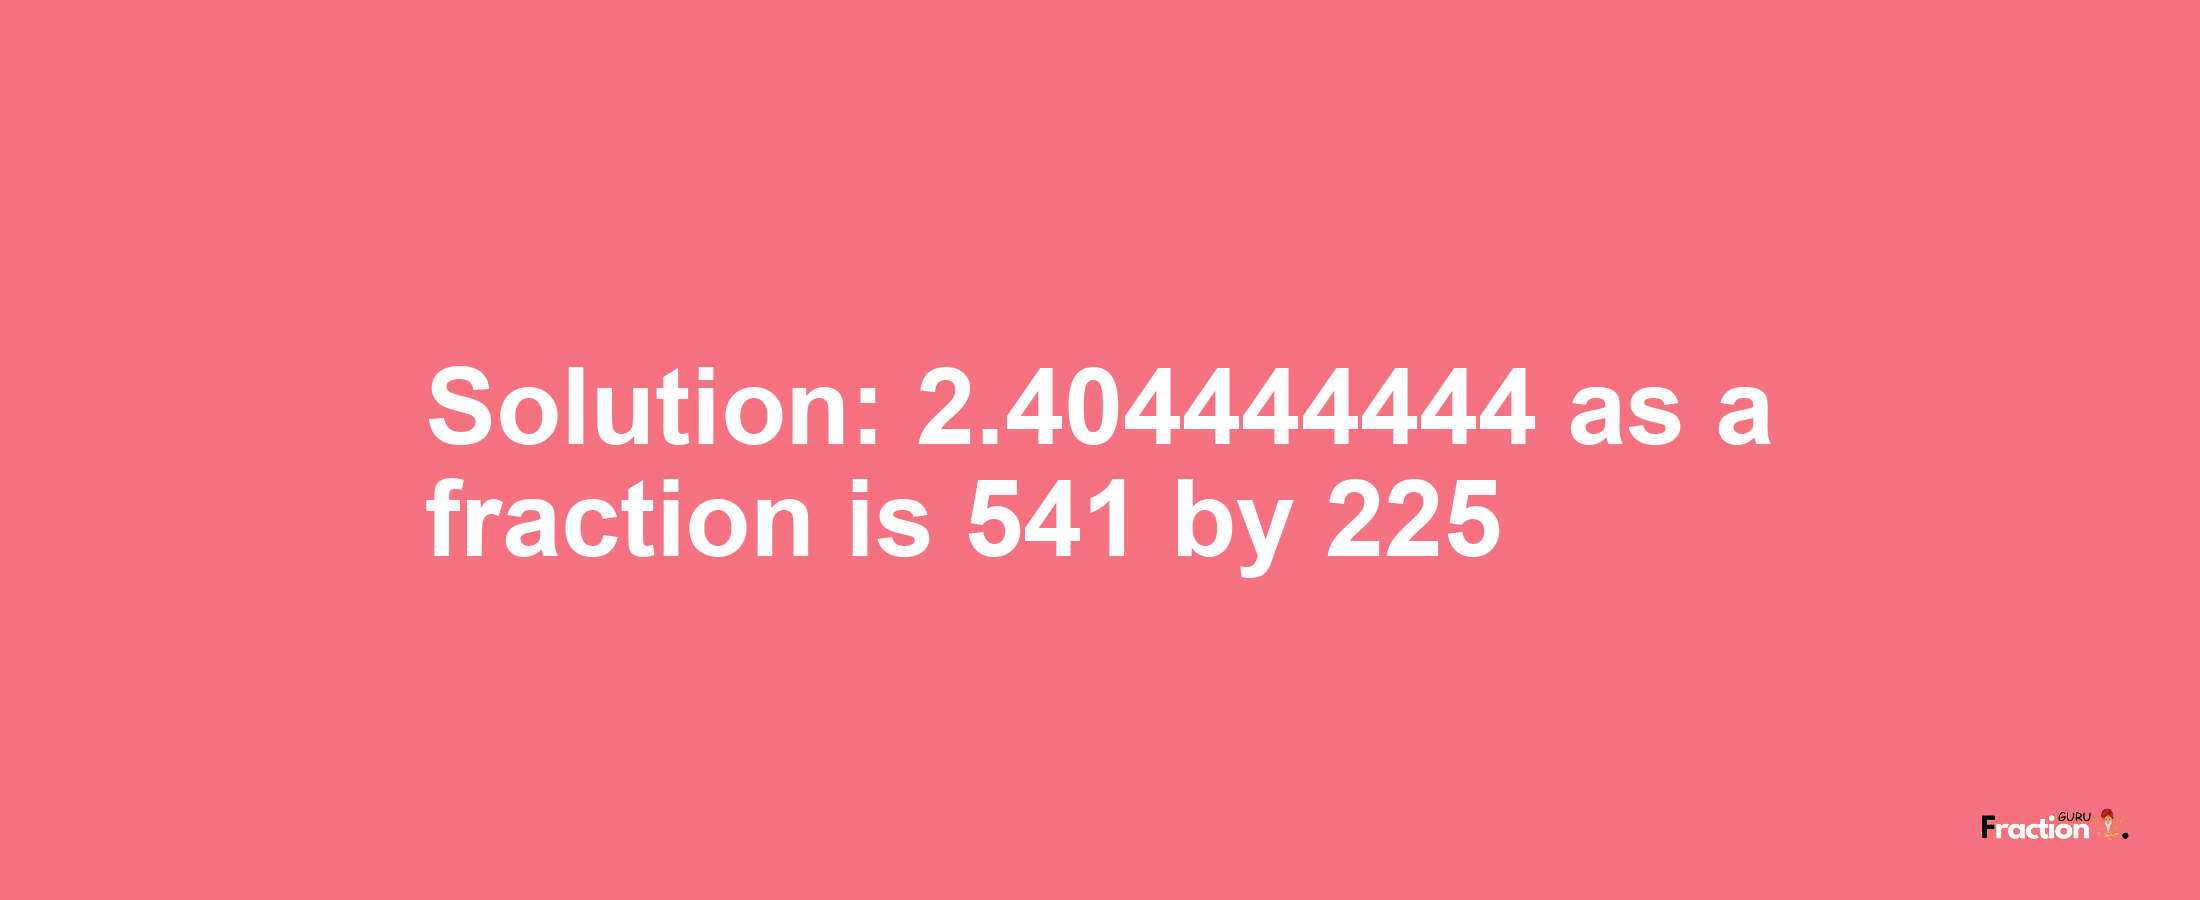 Solution:2.404444444 as a fraction is 541/225